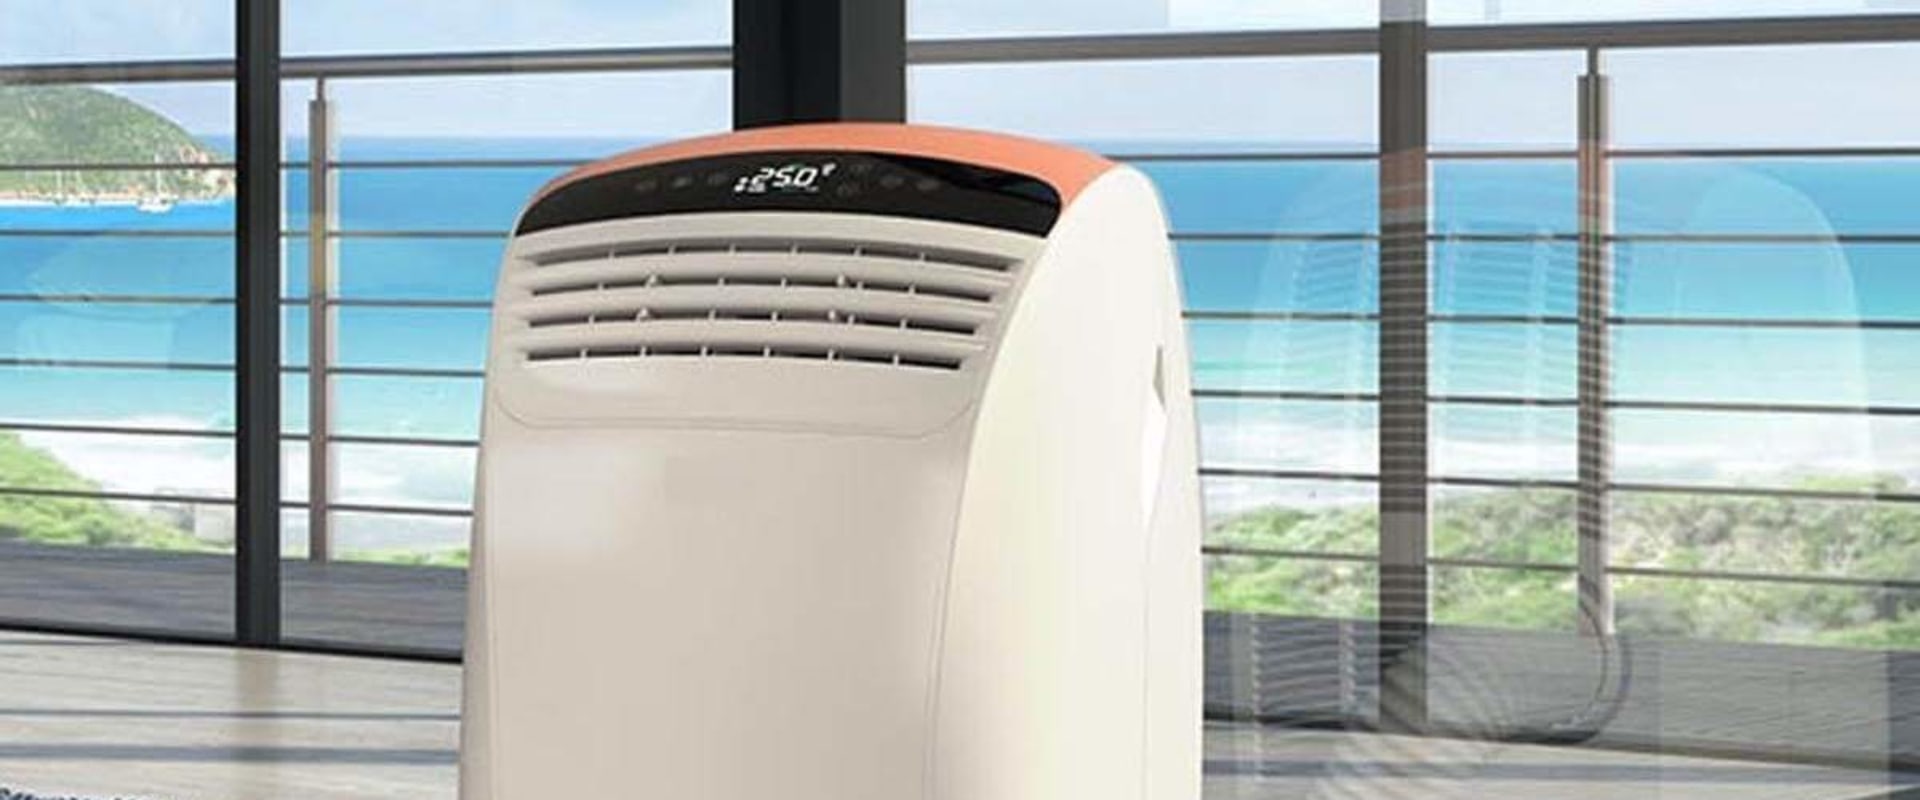 Finding the Perfect Air Conditioner with Dehumidifier Capability Near You